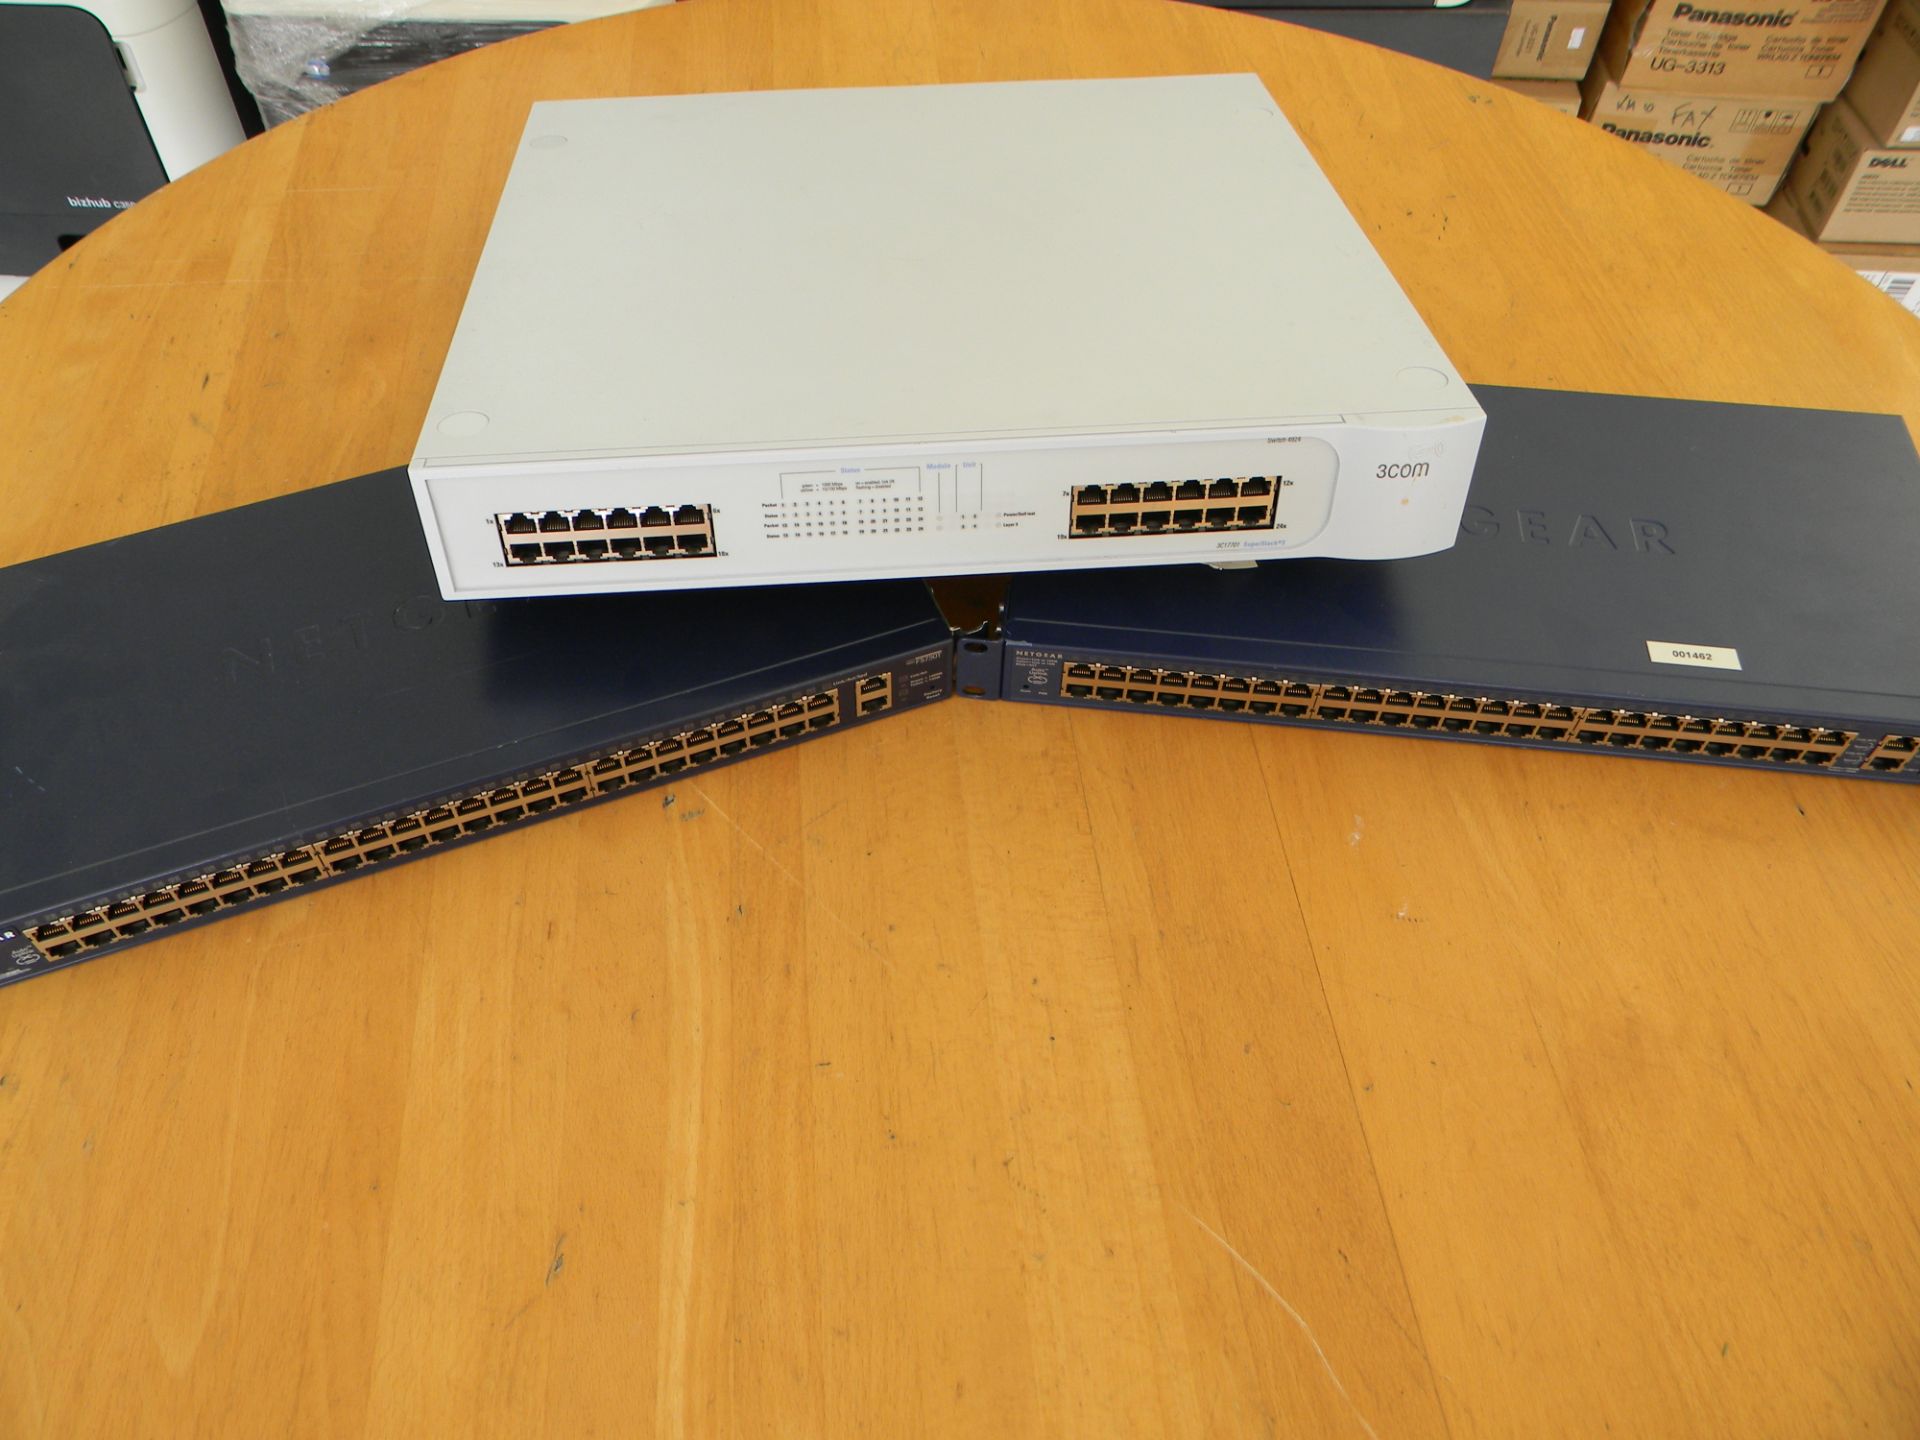 3 x Network switches